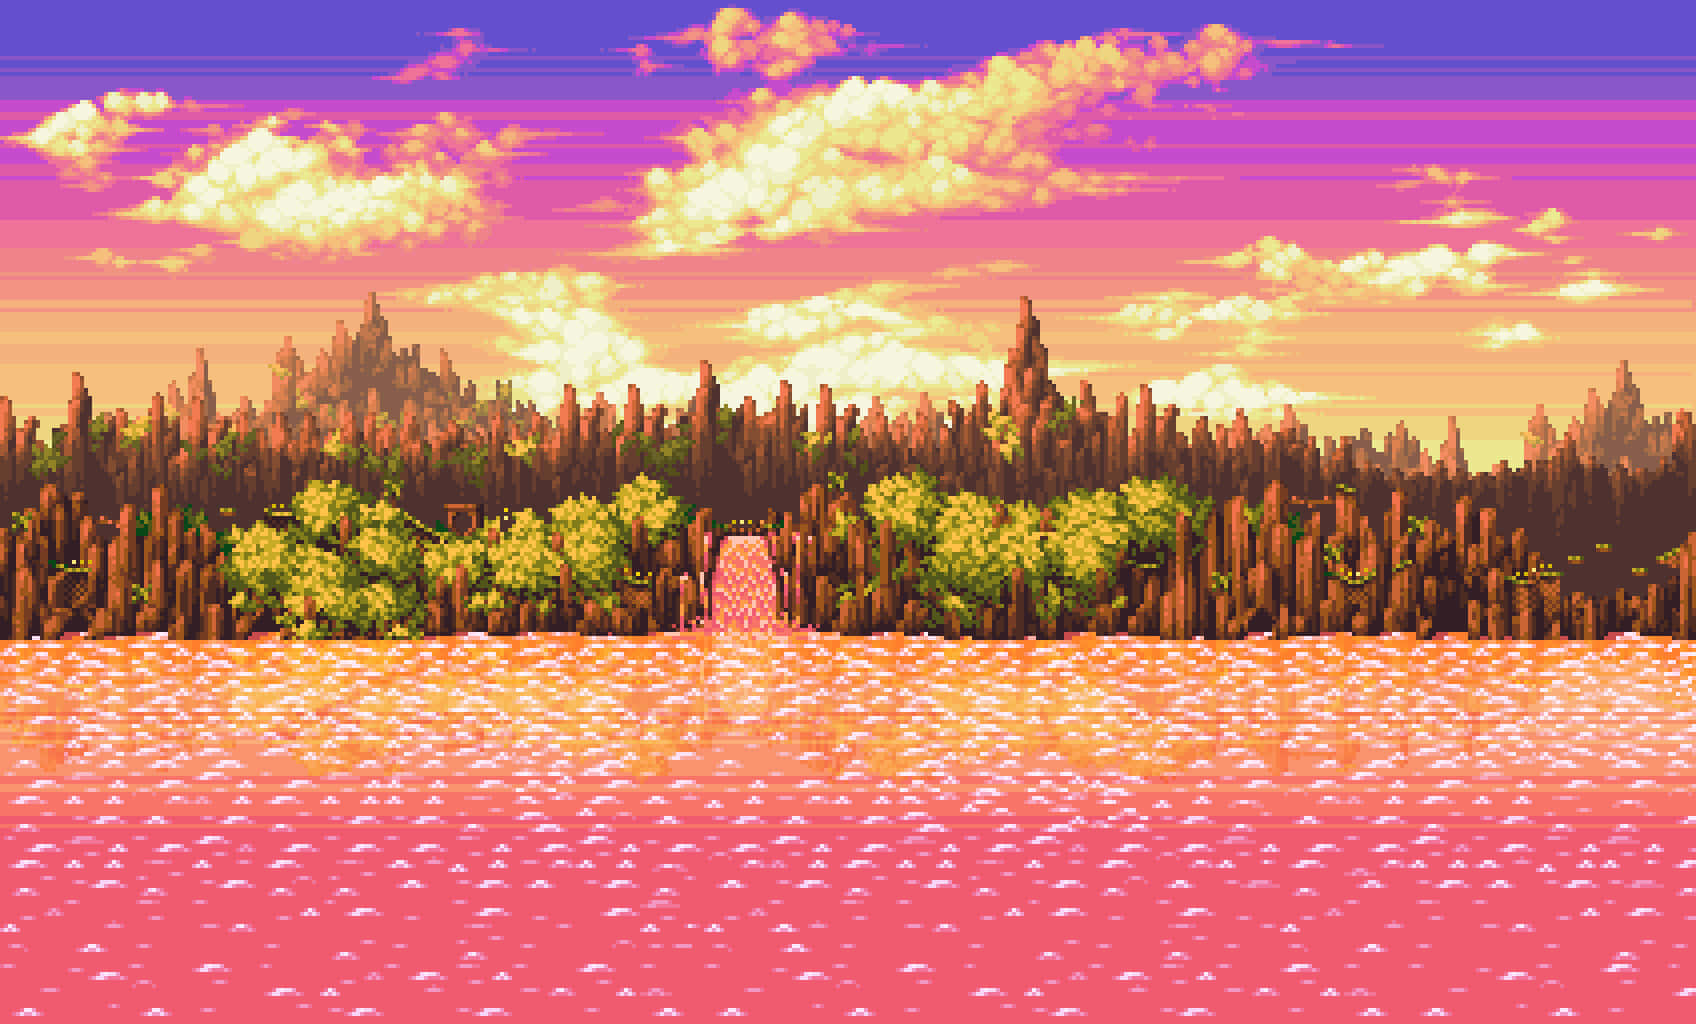 A scenic view of the evergreen Green Hill Zone